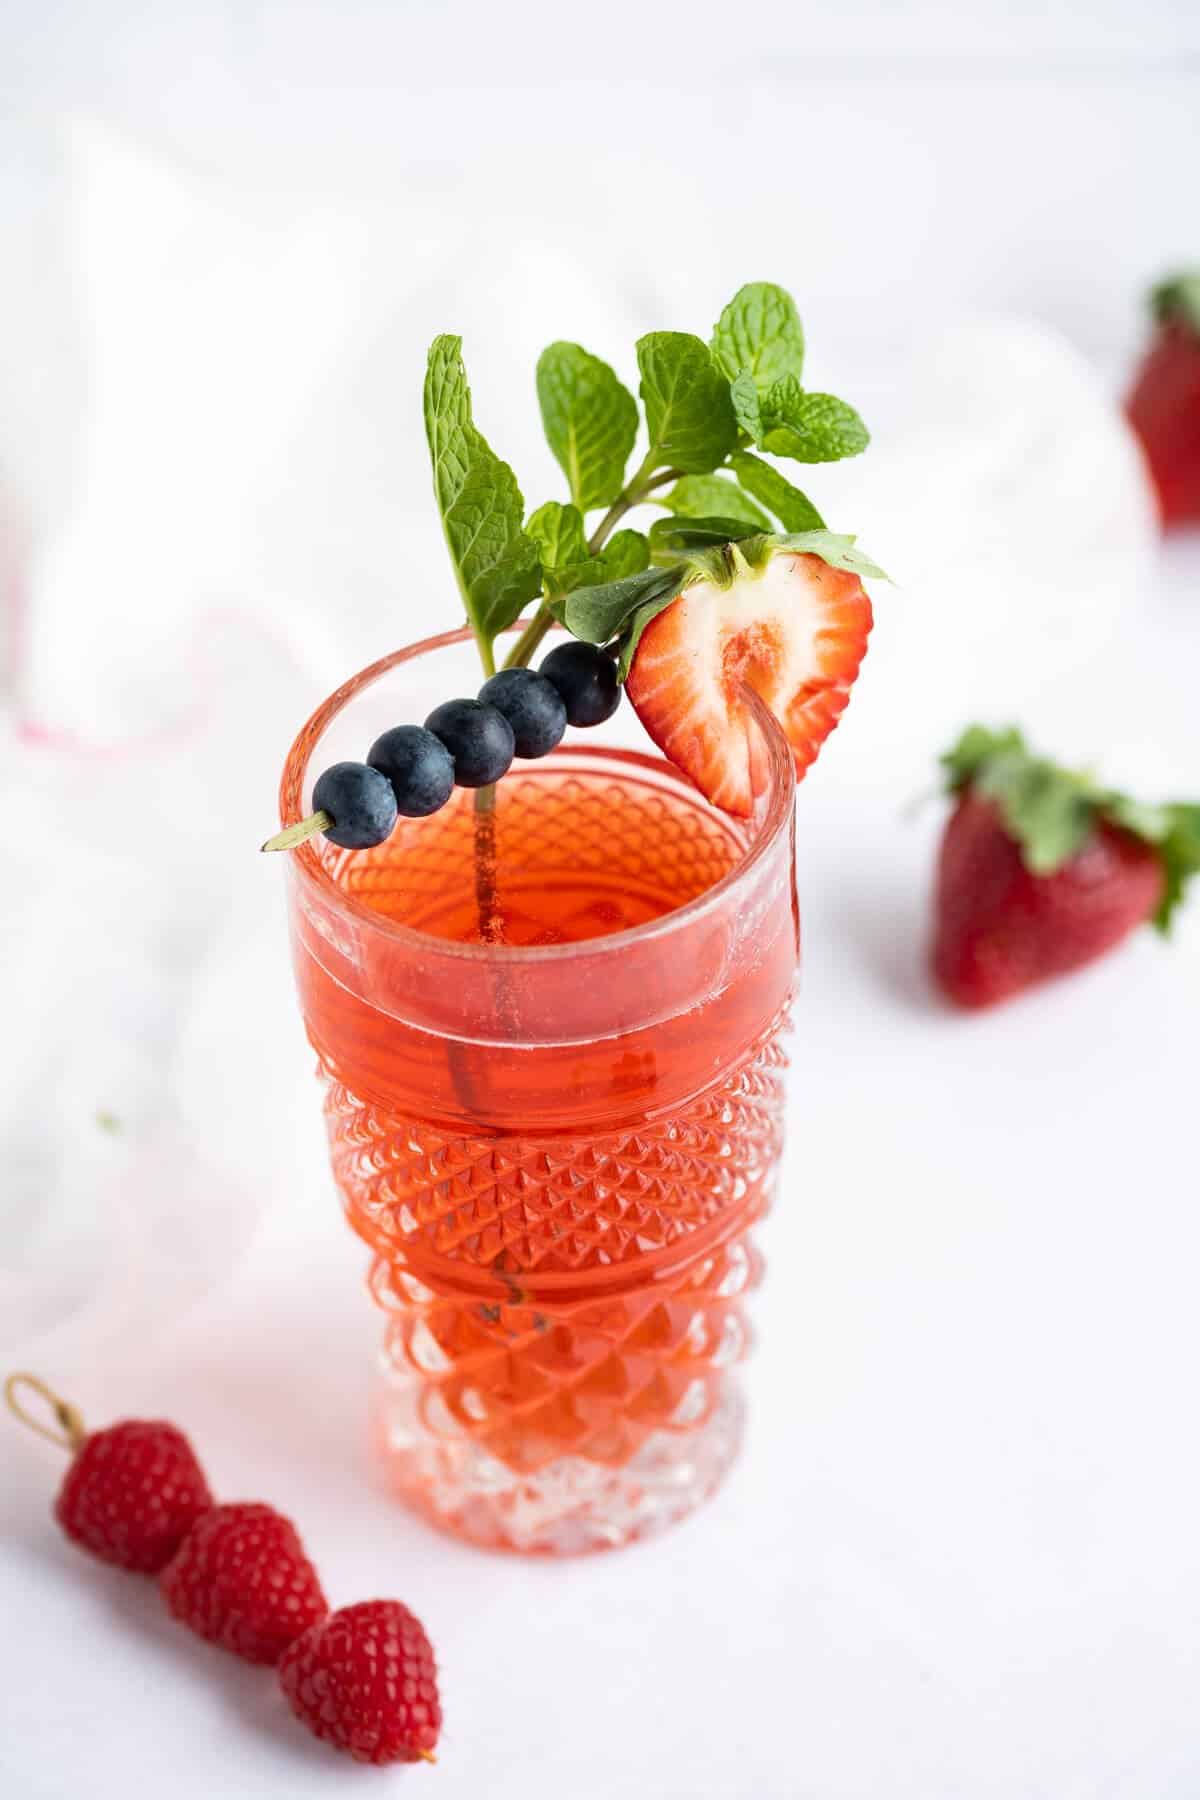 Berry flavored kombucha in a decorative tall glass garnished with a cocktail skewer of blueberries, a sliced strawberry, and a sprig of mint leaves.